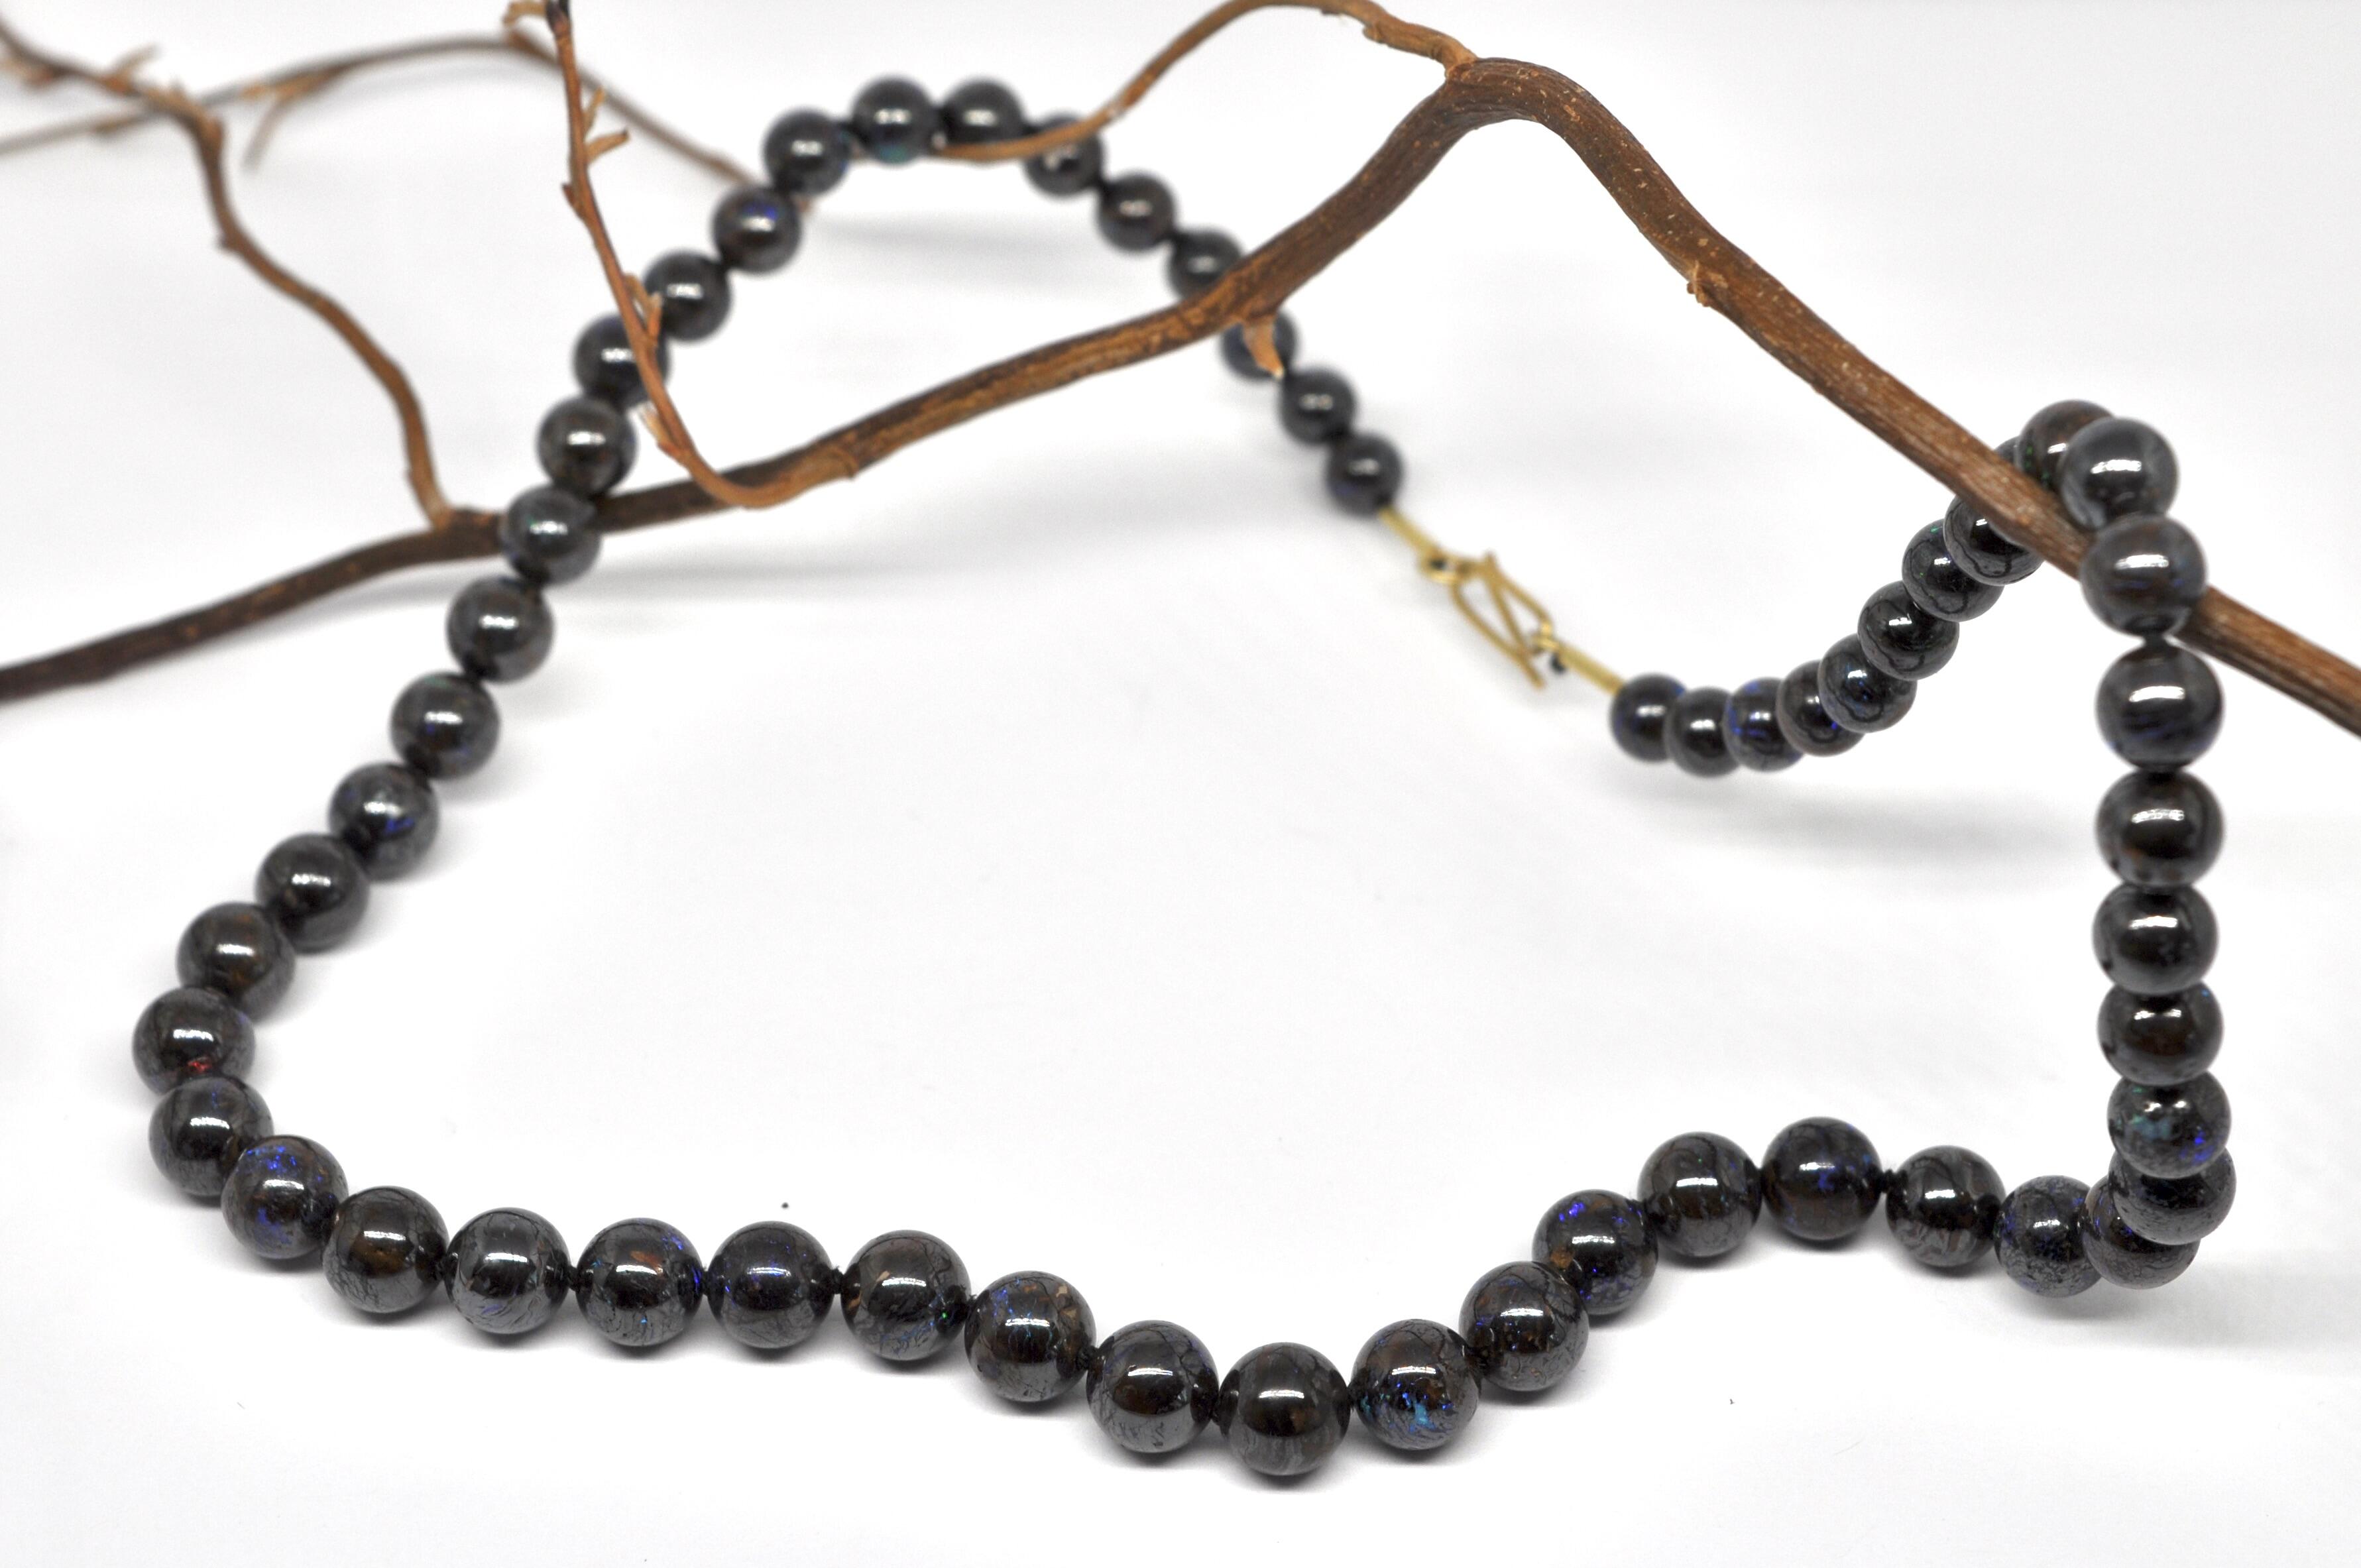 Boulder opal beads necklace with yellow gold